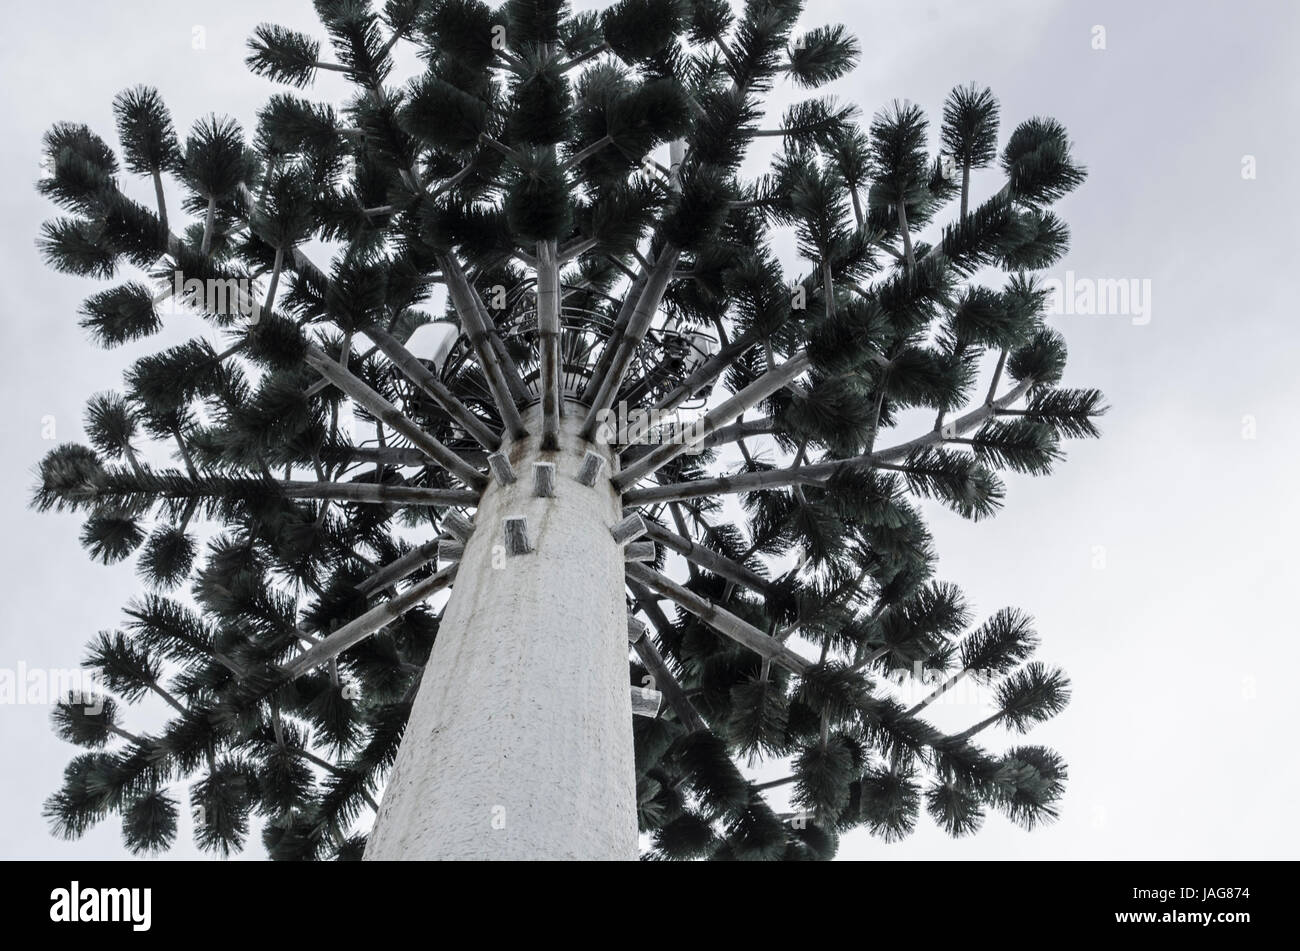 telecommunication tower arial disguised as tree Stock Photo